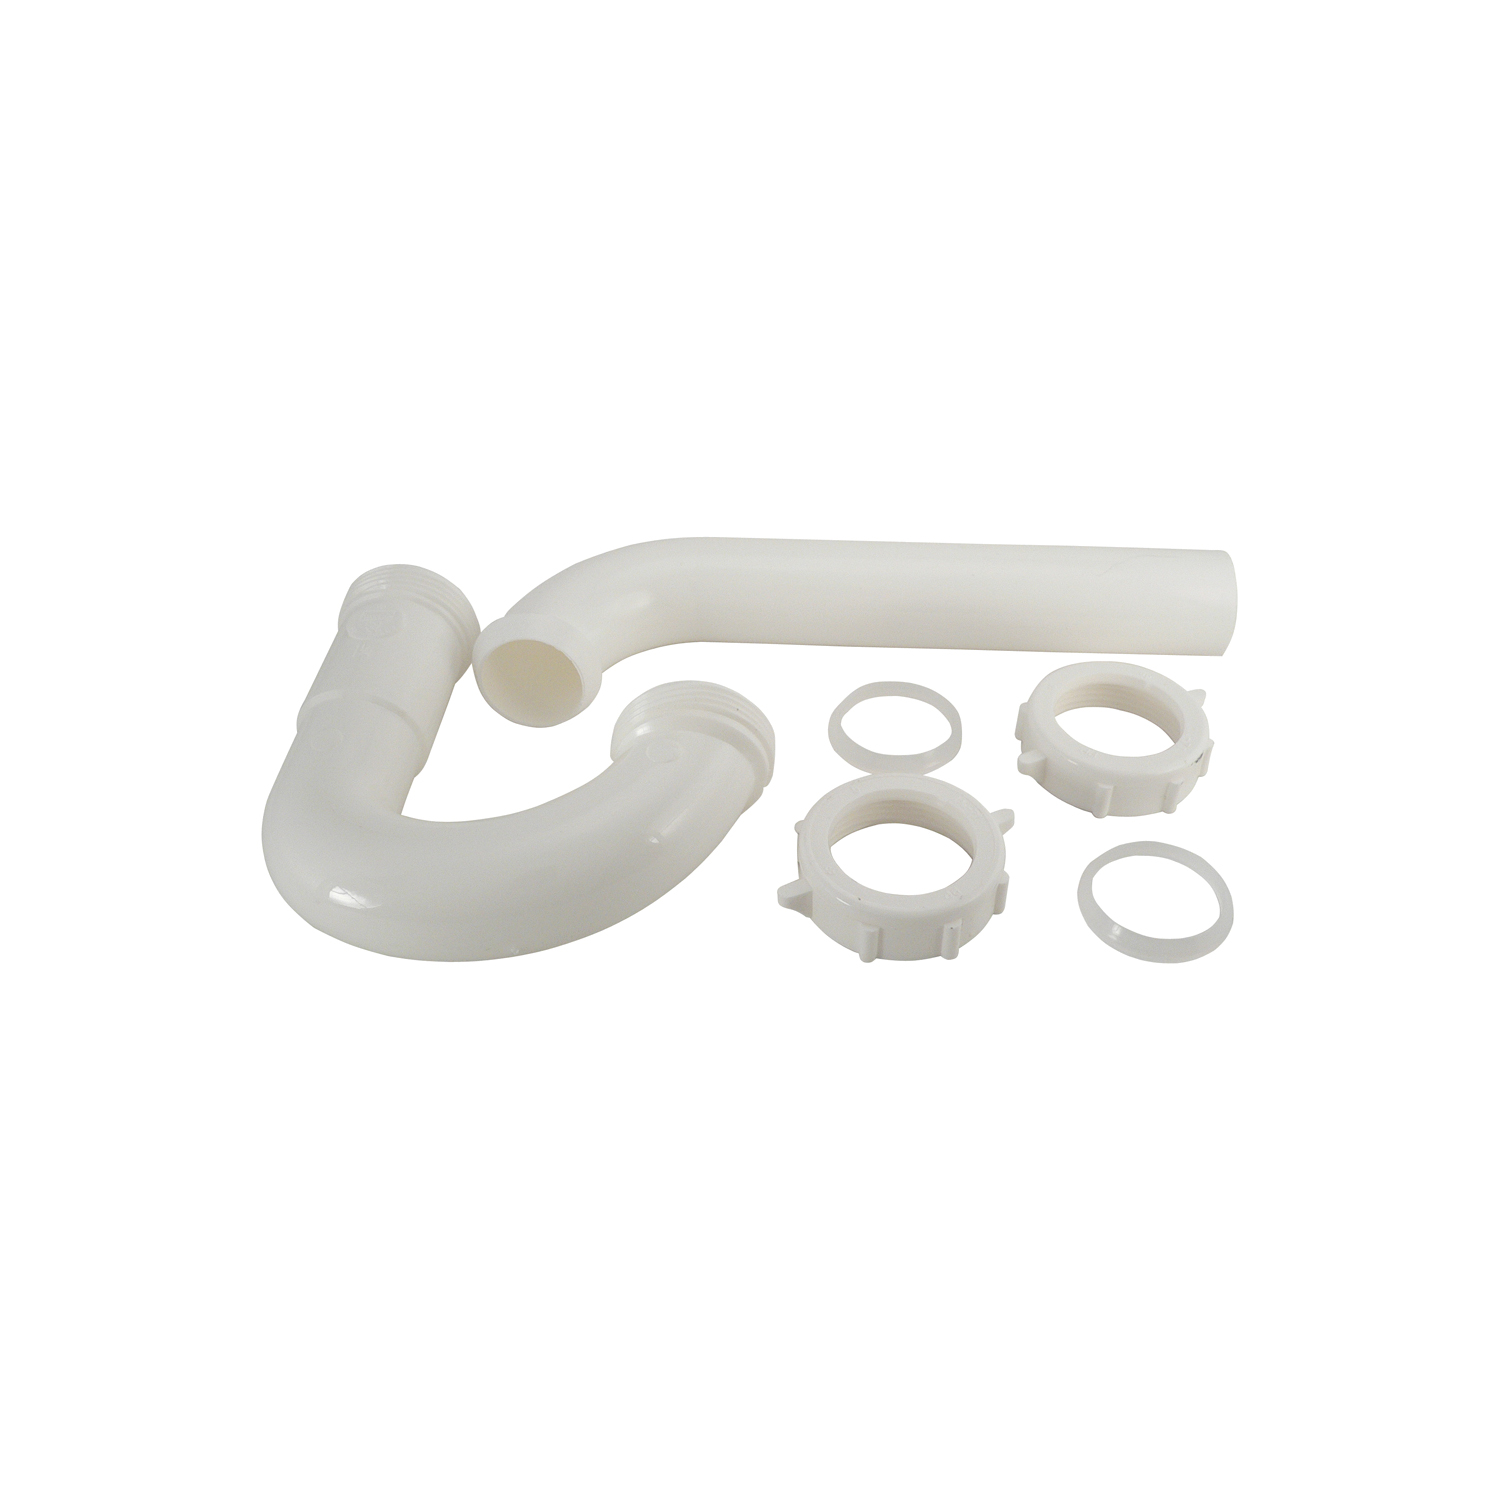 Keeney 200W2 P-Trap, 1-1/4 in Inlet x 1 in Outlet, White, Polypropylene, Slip-Joint Connection